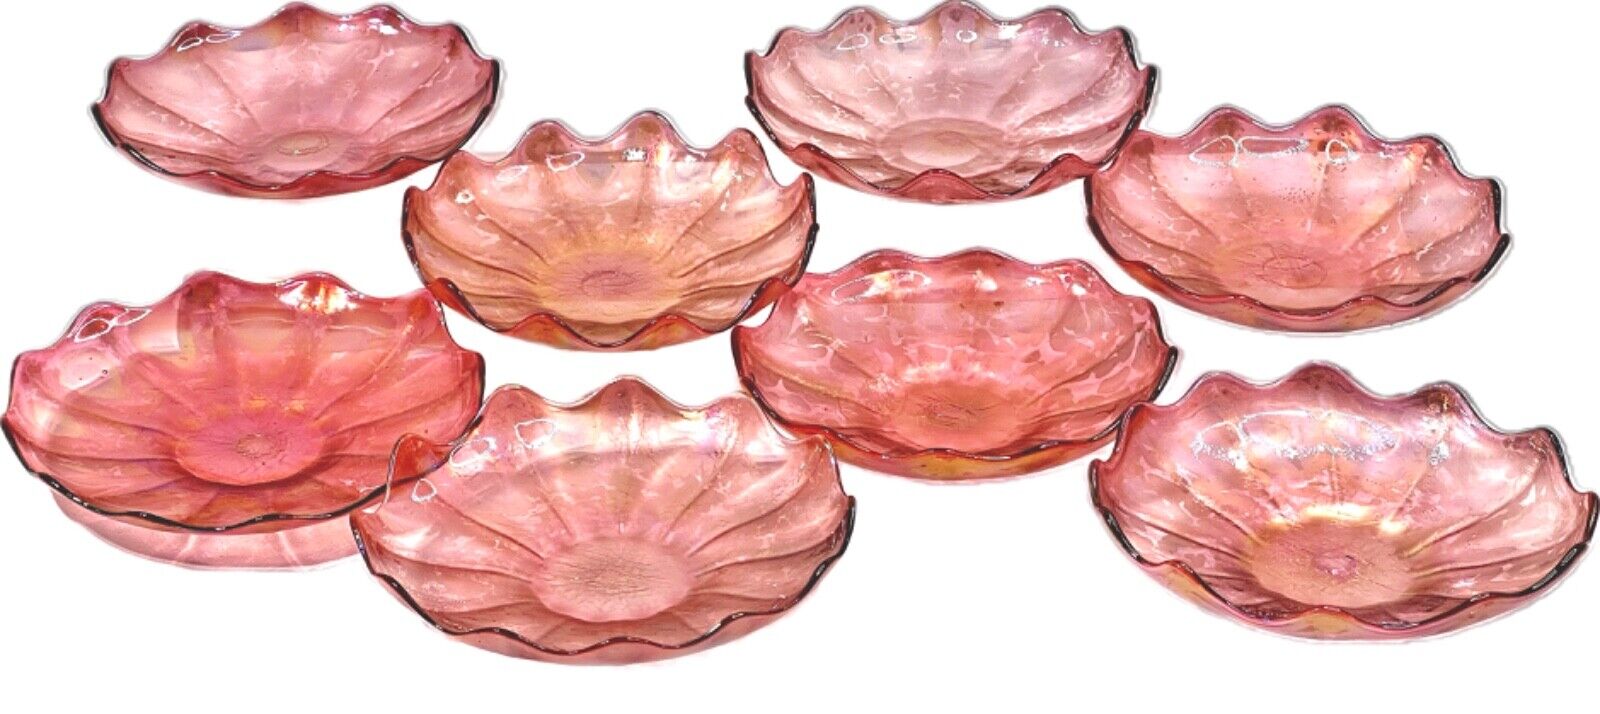 Tiffany\'s L.C.T Favrile Style Iridescent Oil spotted Glass Dish / Plate Set of 8